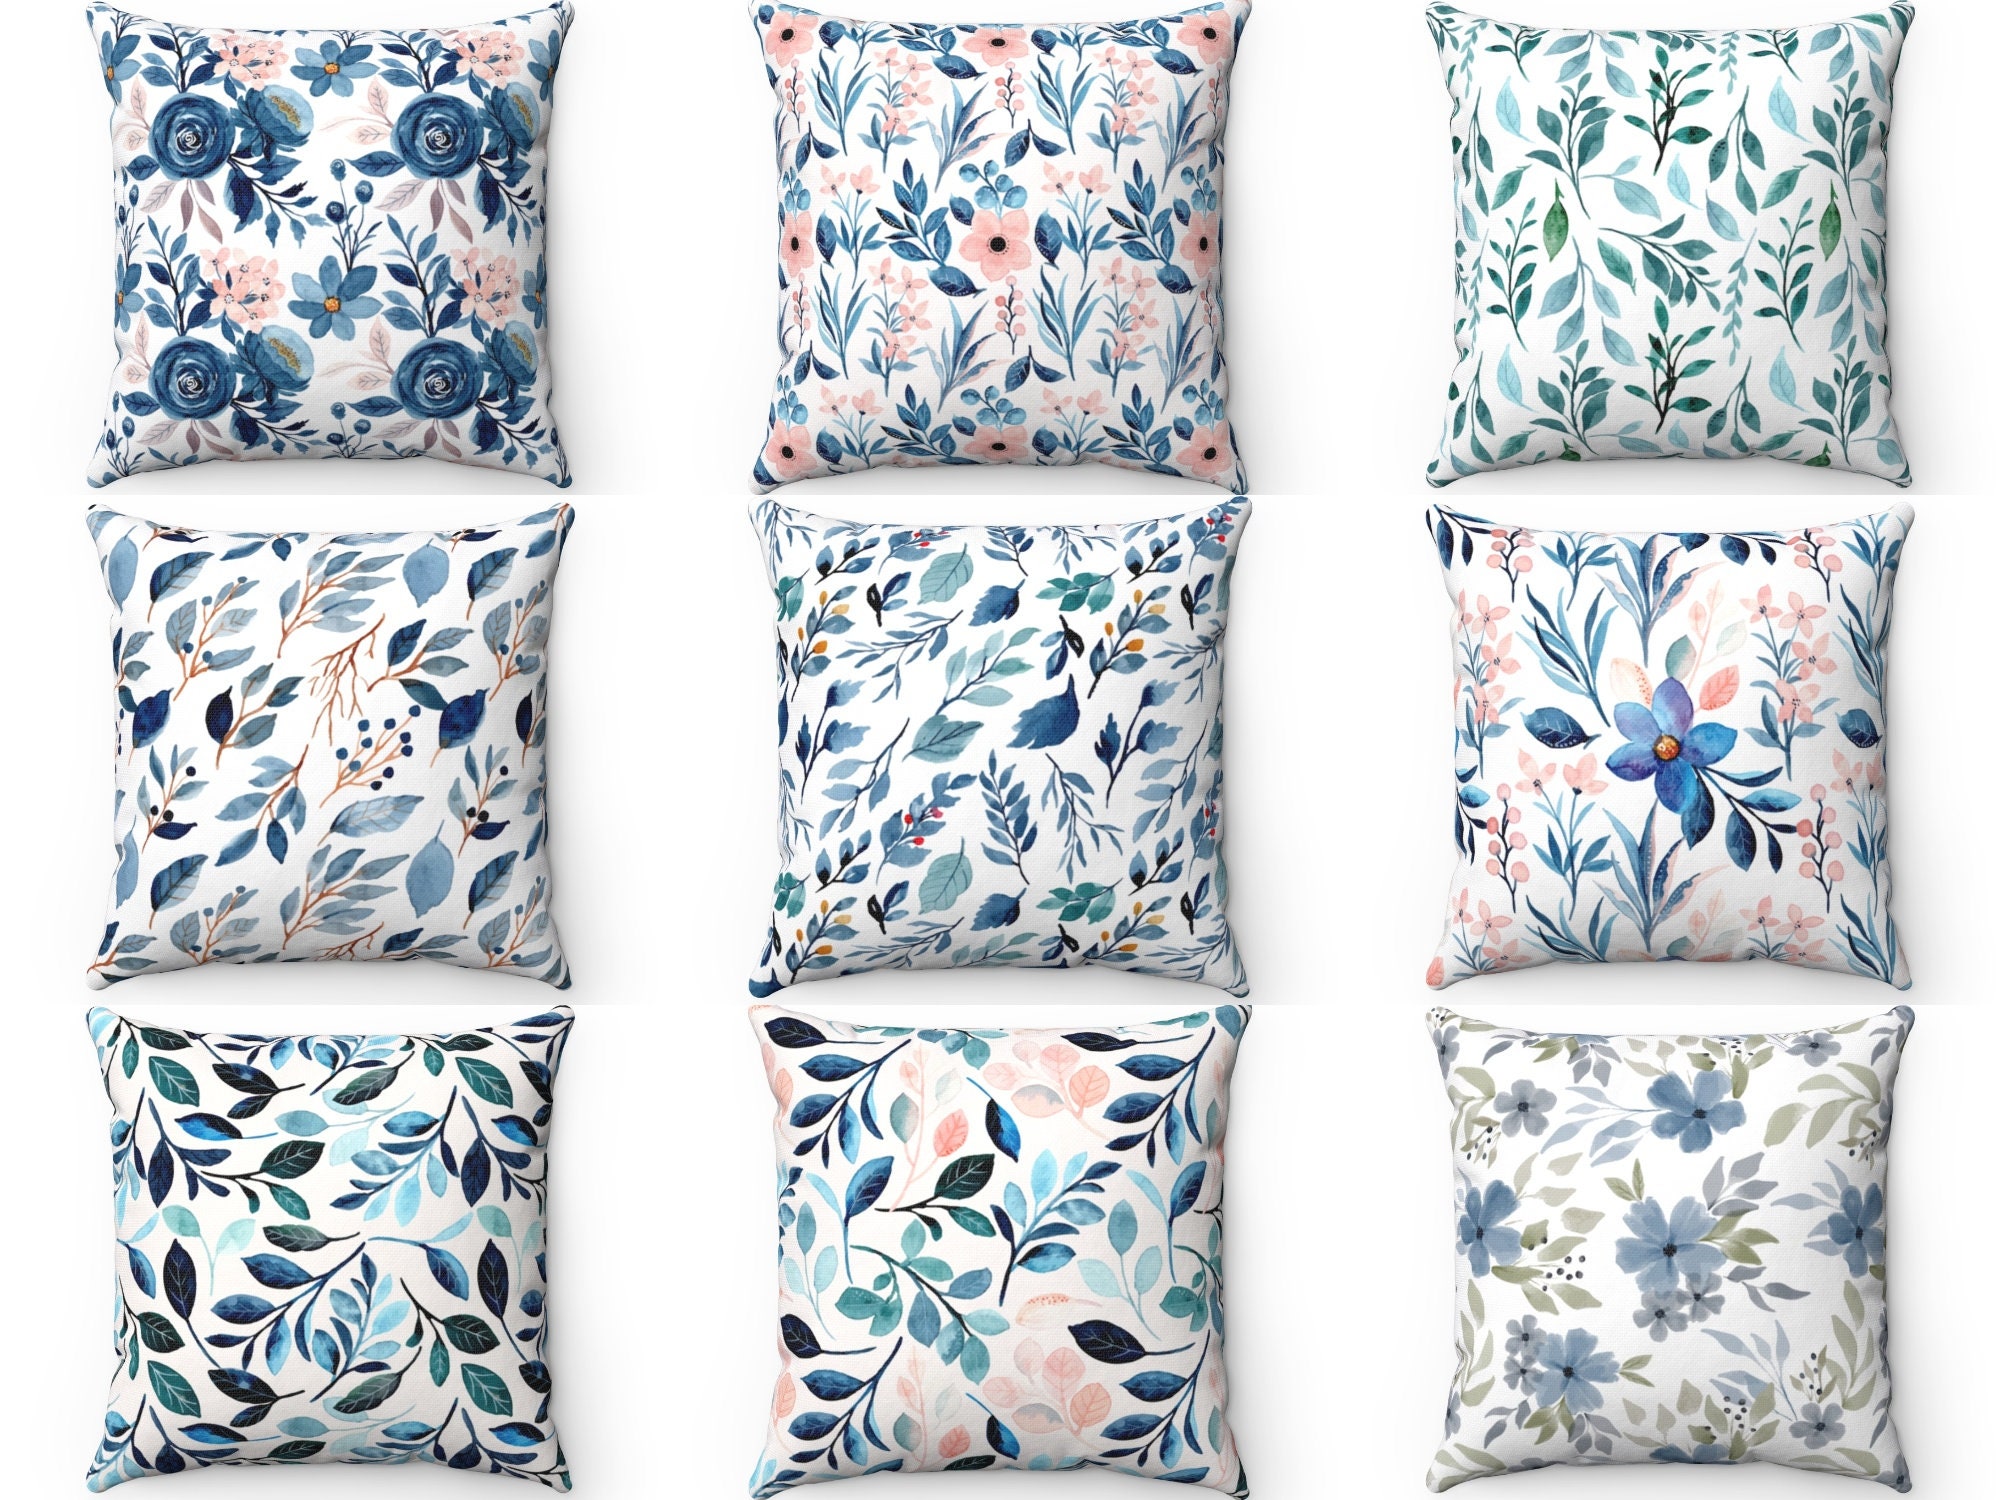  Made in USA Outdoor Patio Couch Quantity 1 Throw Pillows from  DiaNoche Designs by Olive Smith - Floral Doddle lV : Patio, Lawn & Garden